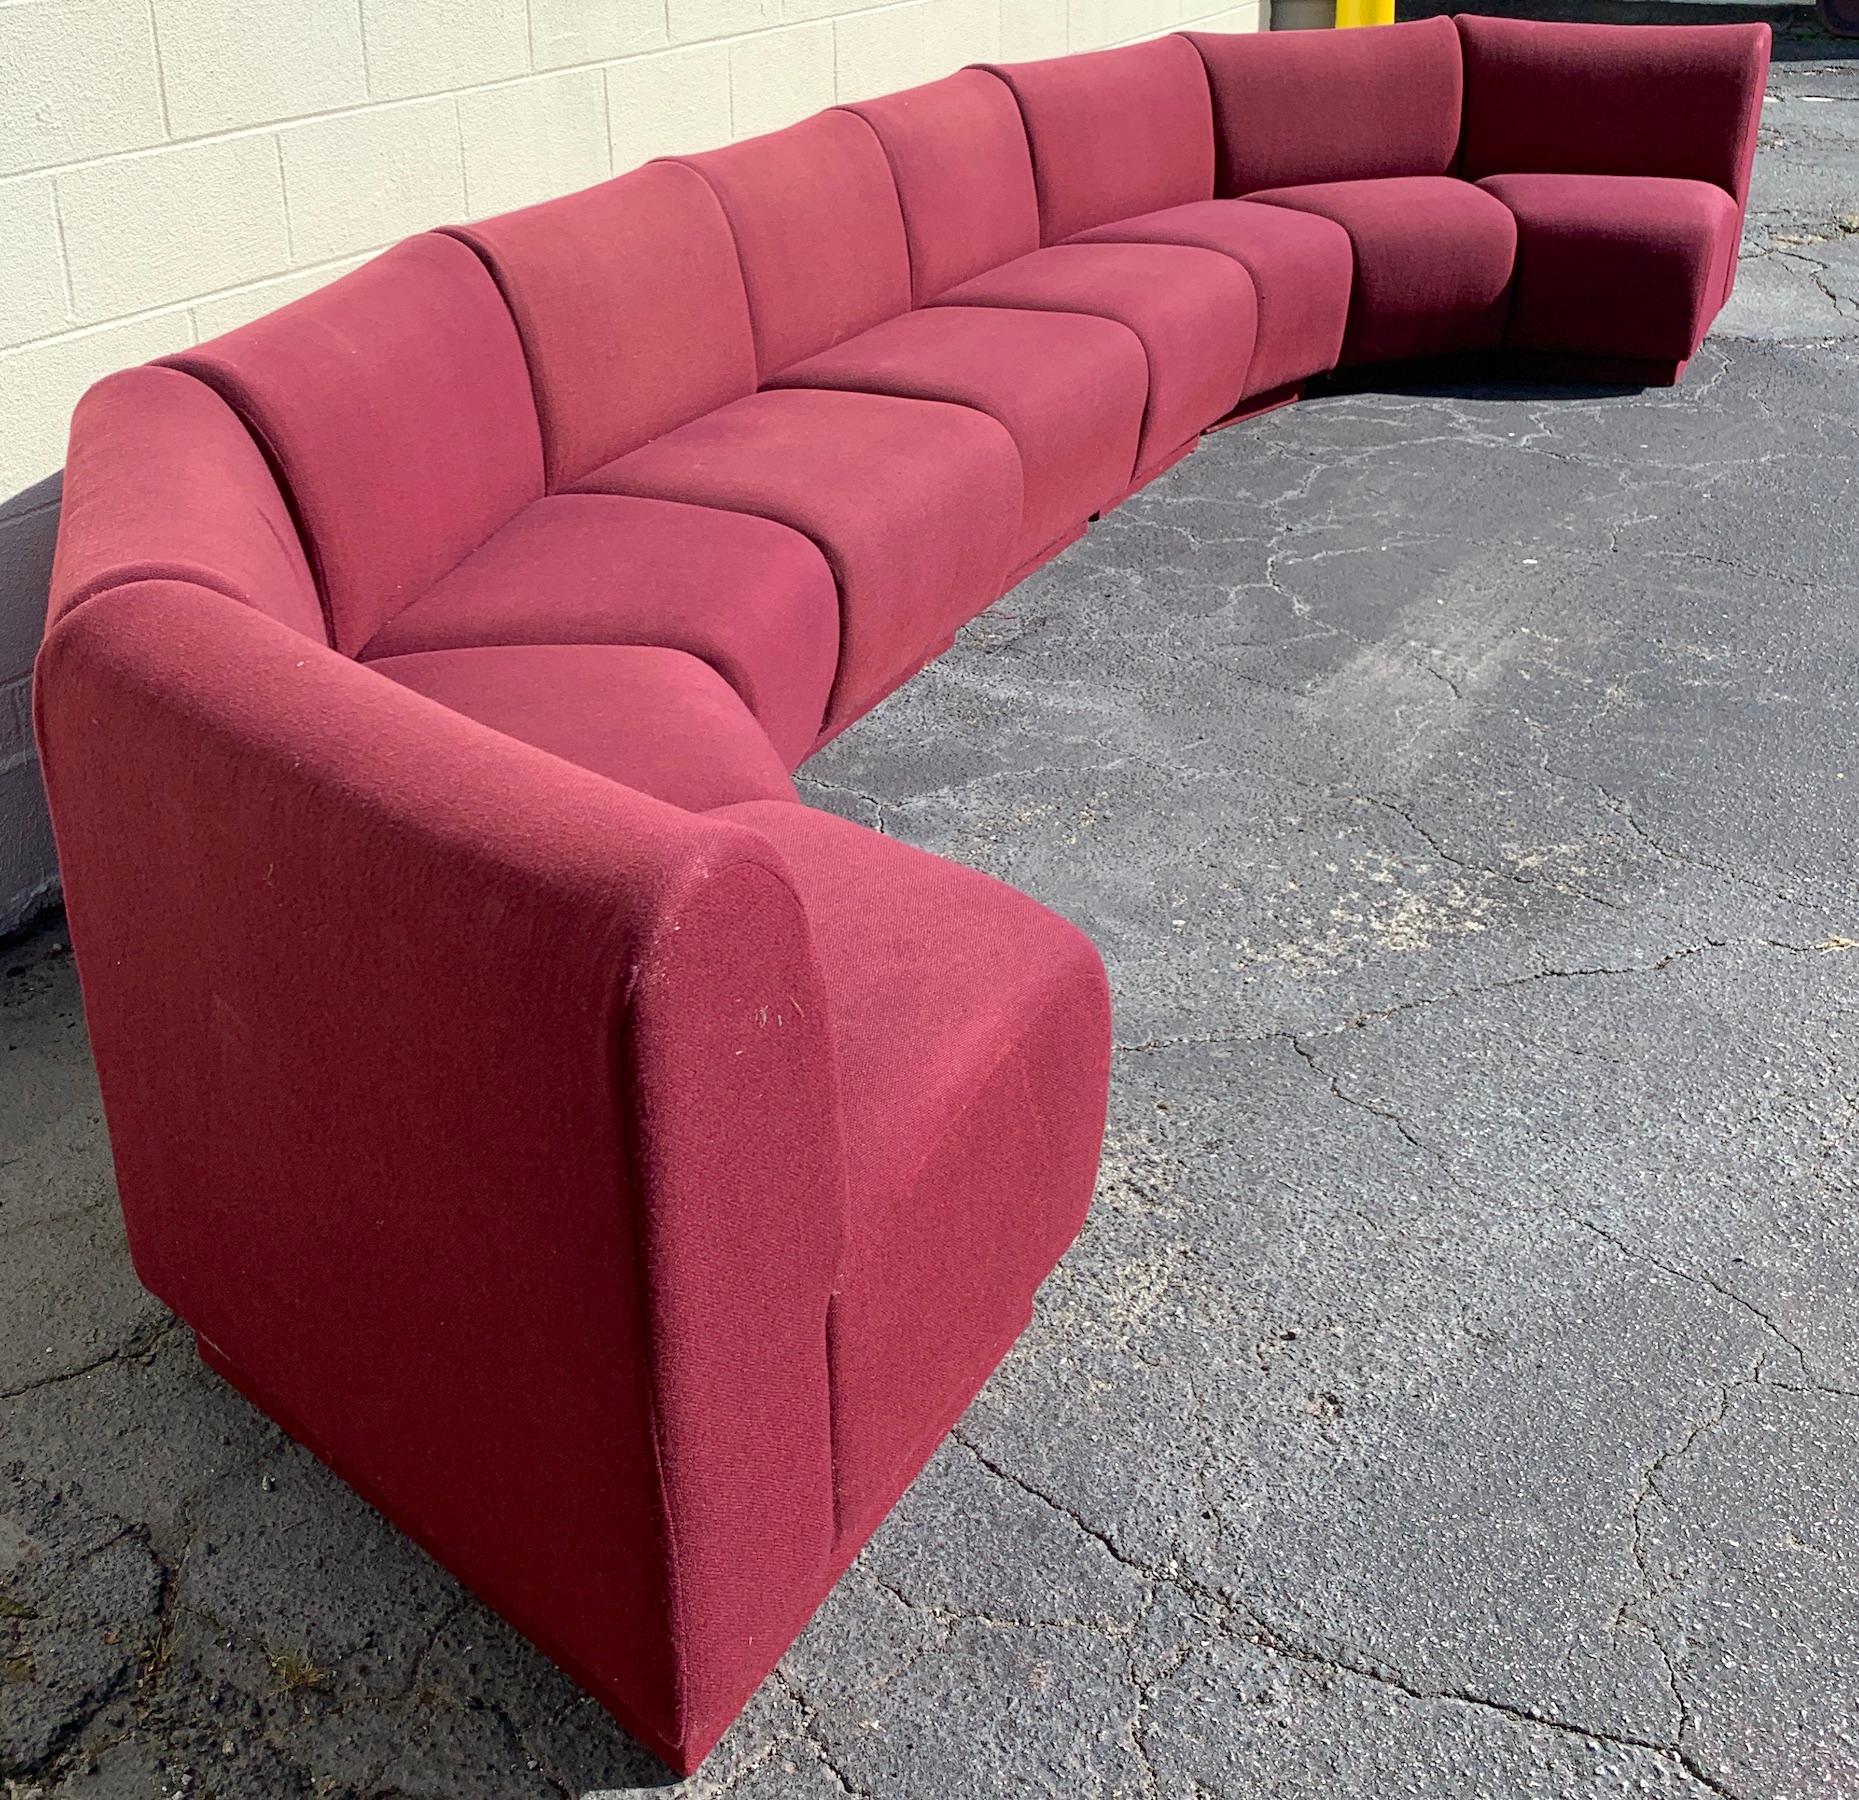 Upholstery 9-Piece Modular Living Room Attributed to Milo Baughman for Thayer Coggin For Sale